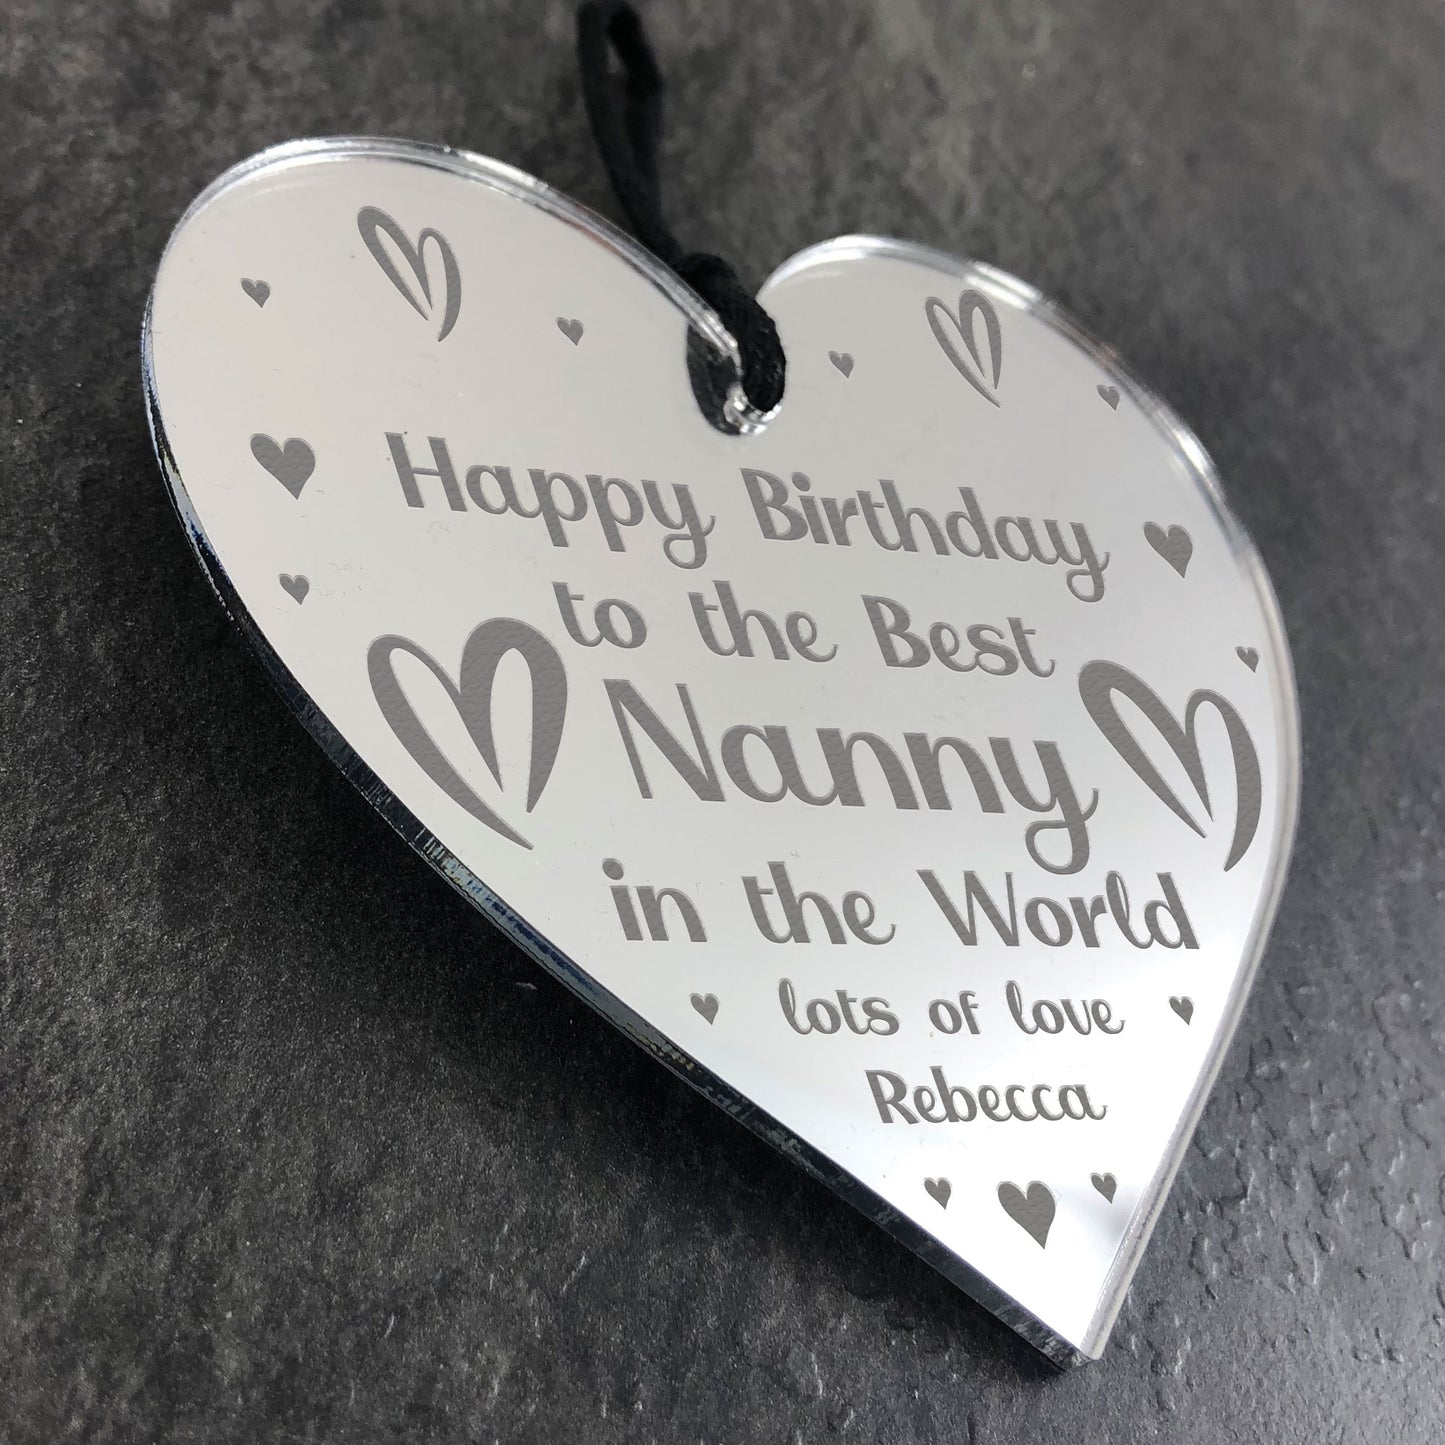 Birthday Gift For Nanny Hanging Engraved Heart Nanny Gift